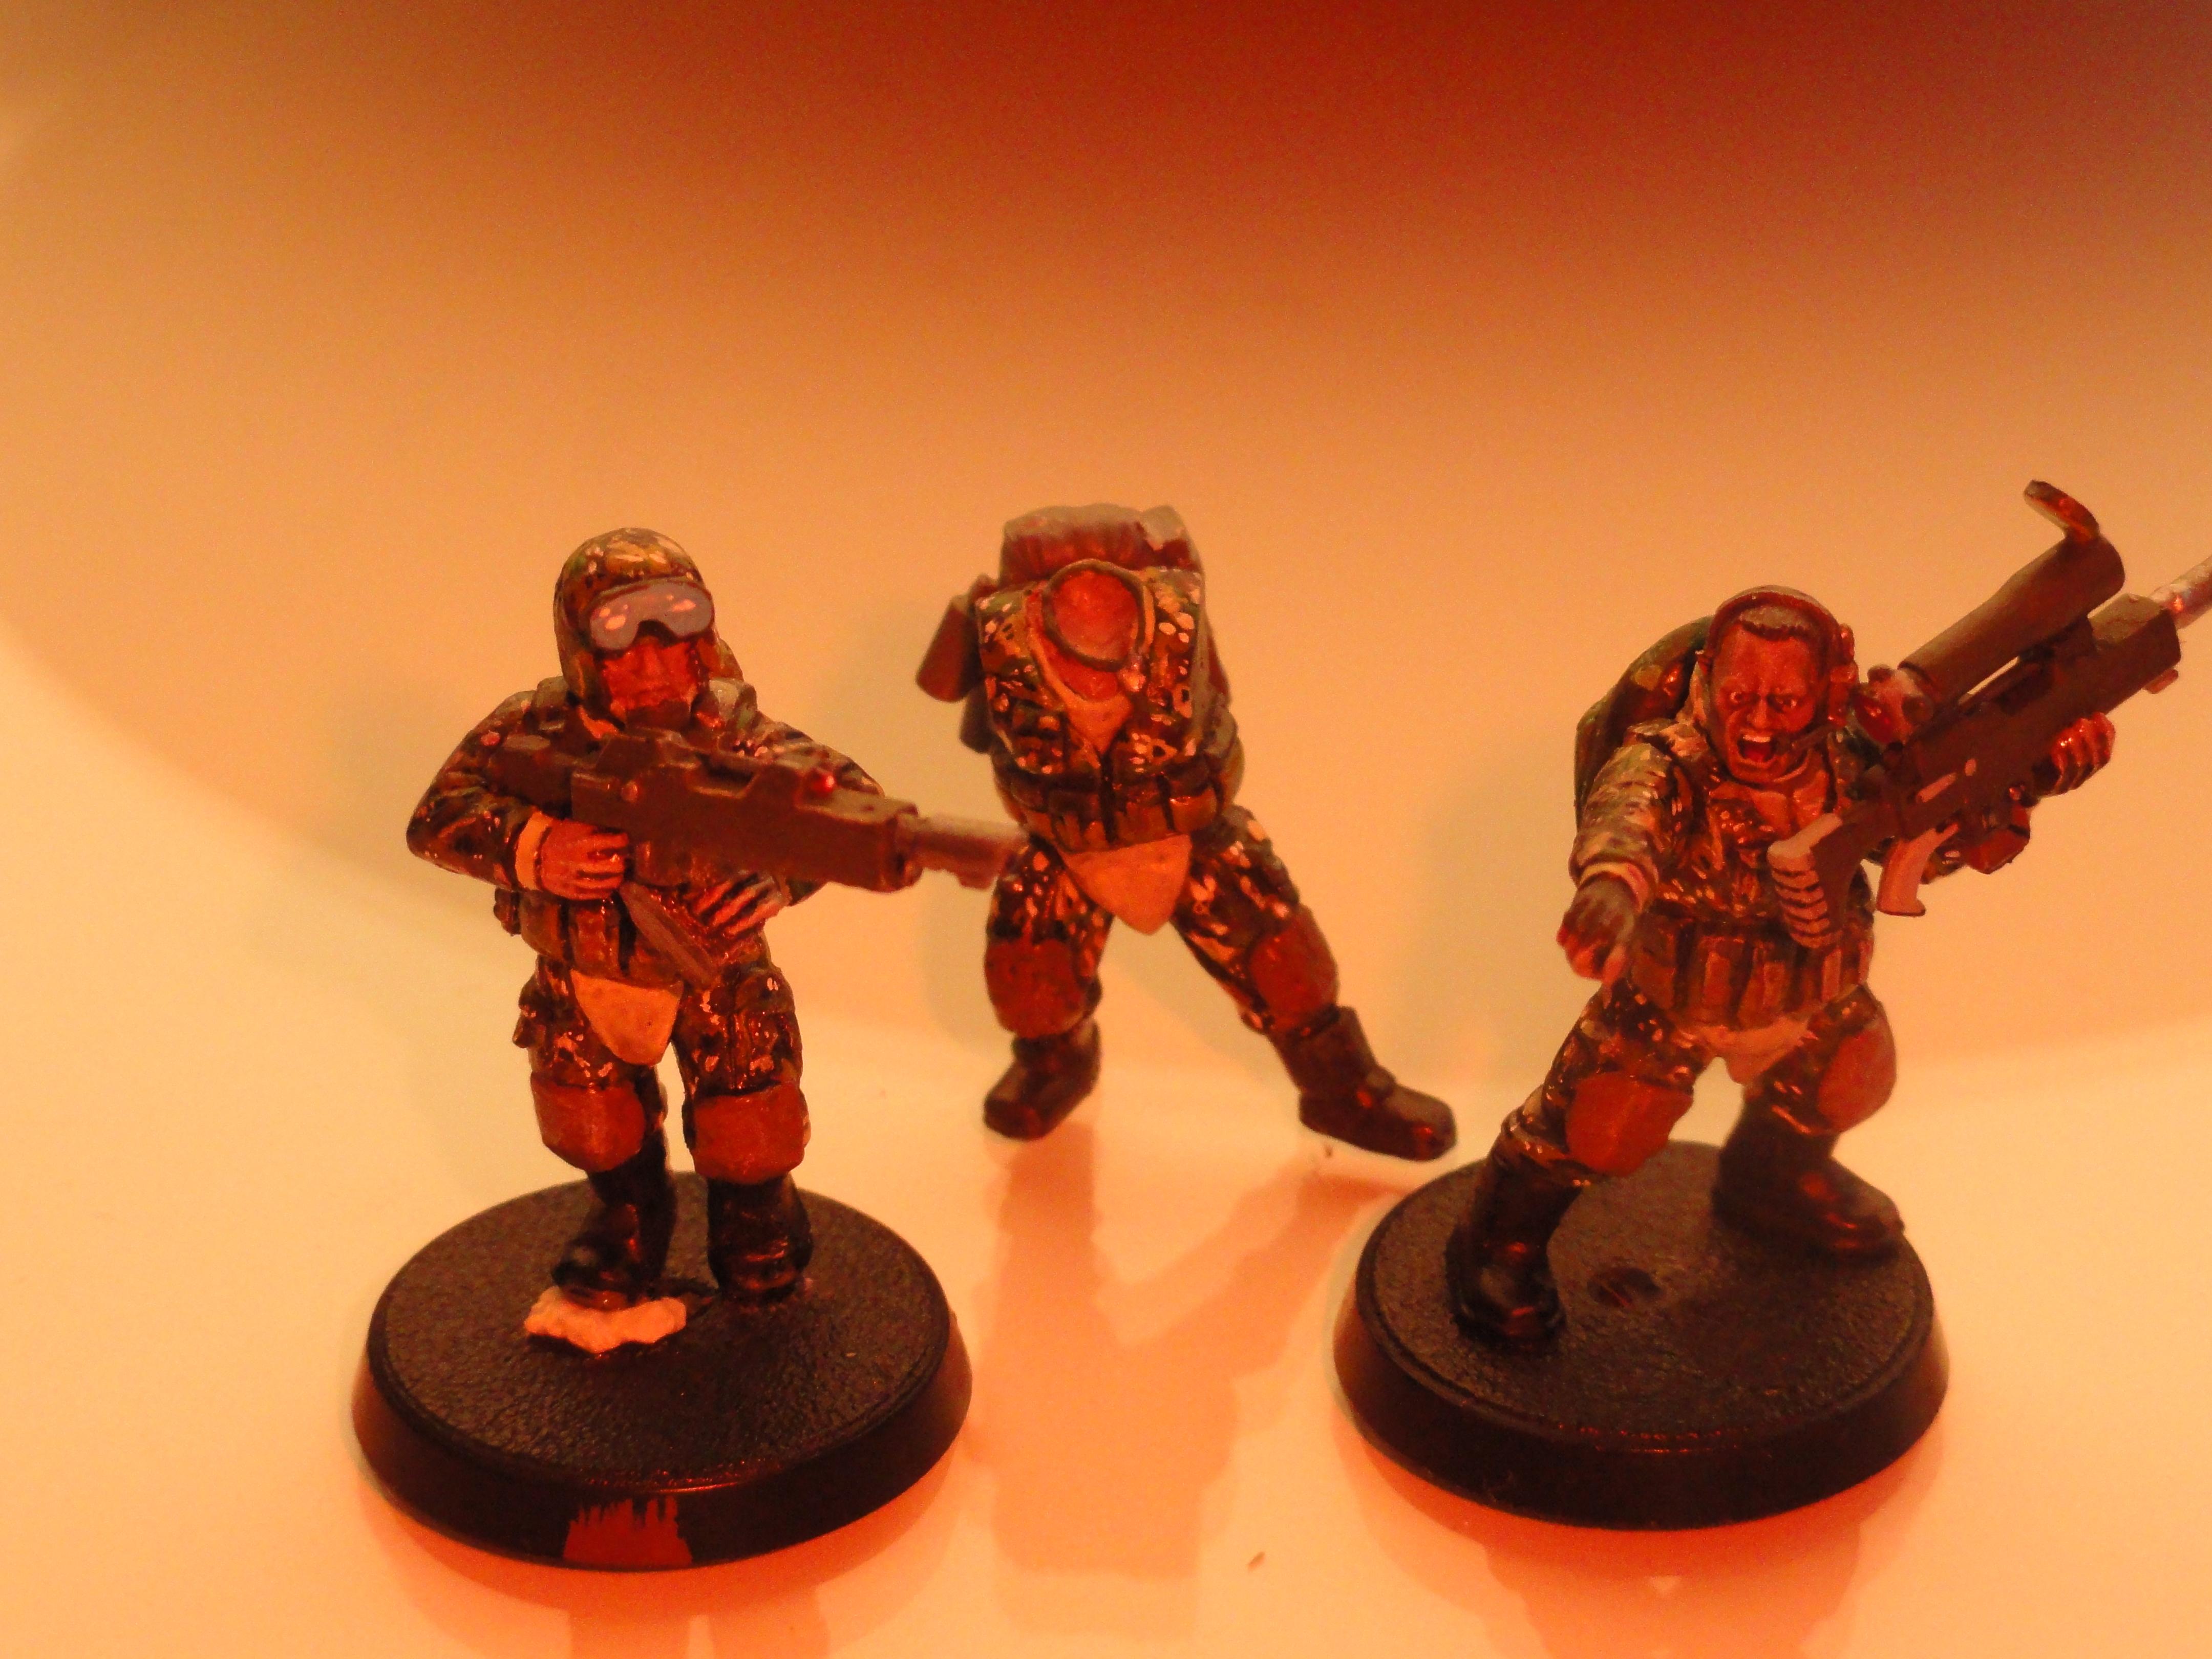 Cadian Sniper, Cadian Special Forces Veterans Conversion, Snipers